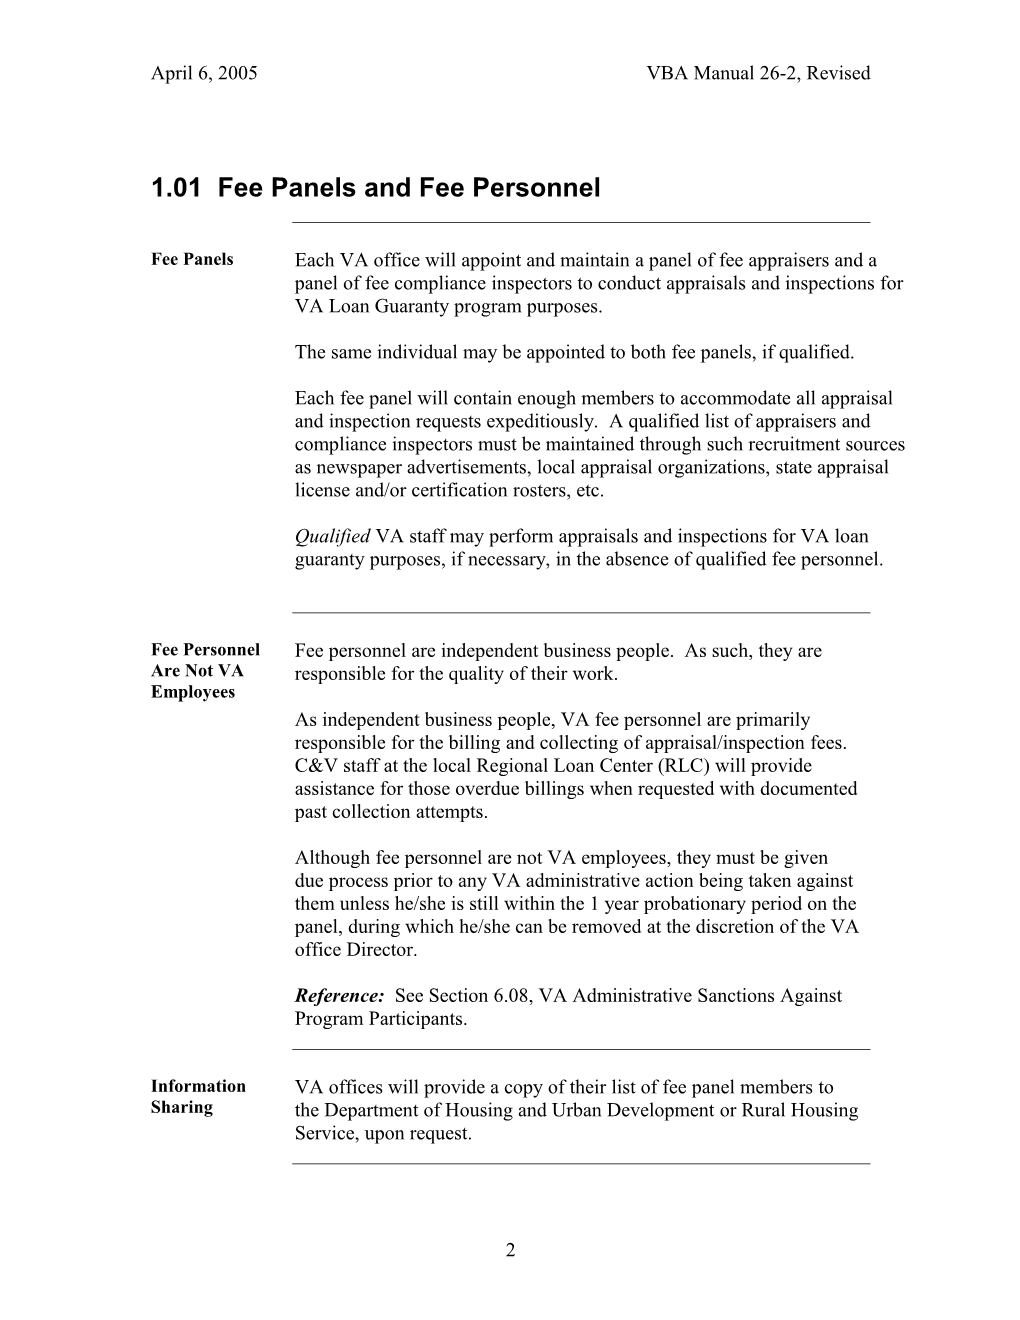 1.01 Fee Panels and Fee Personnel